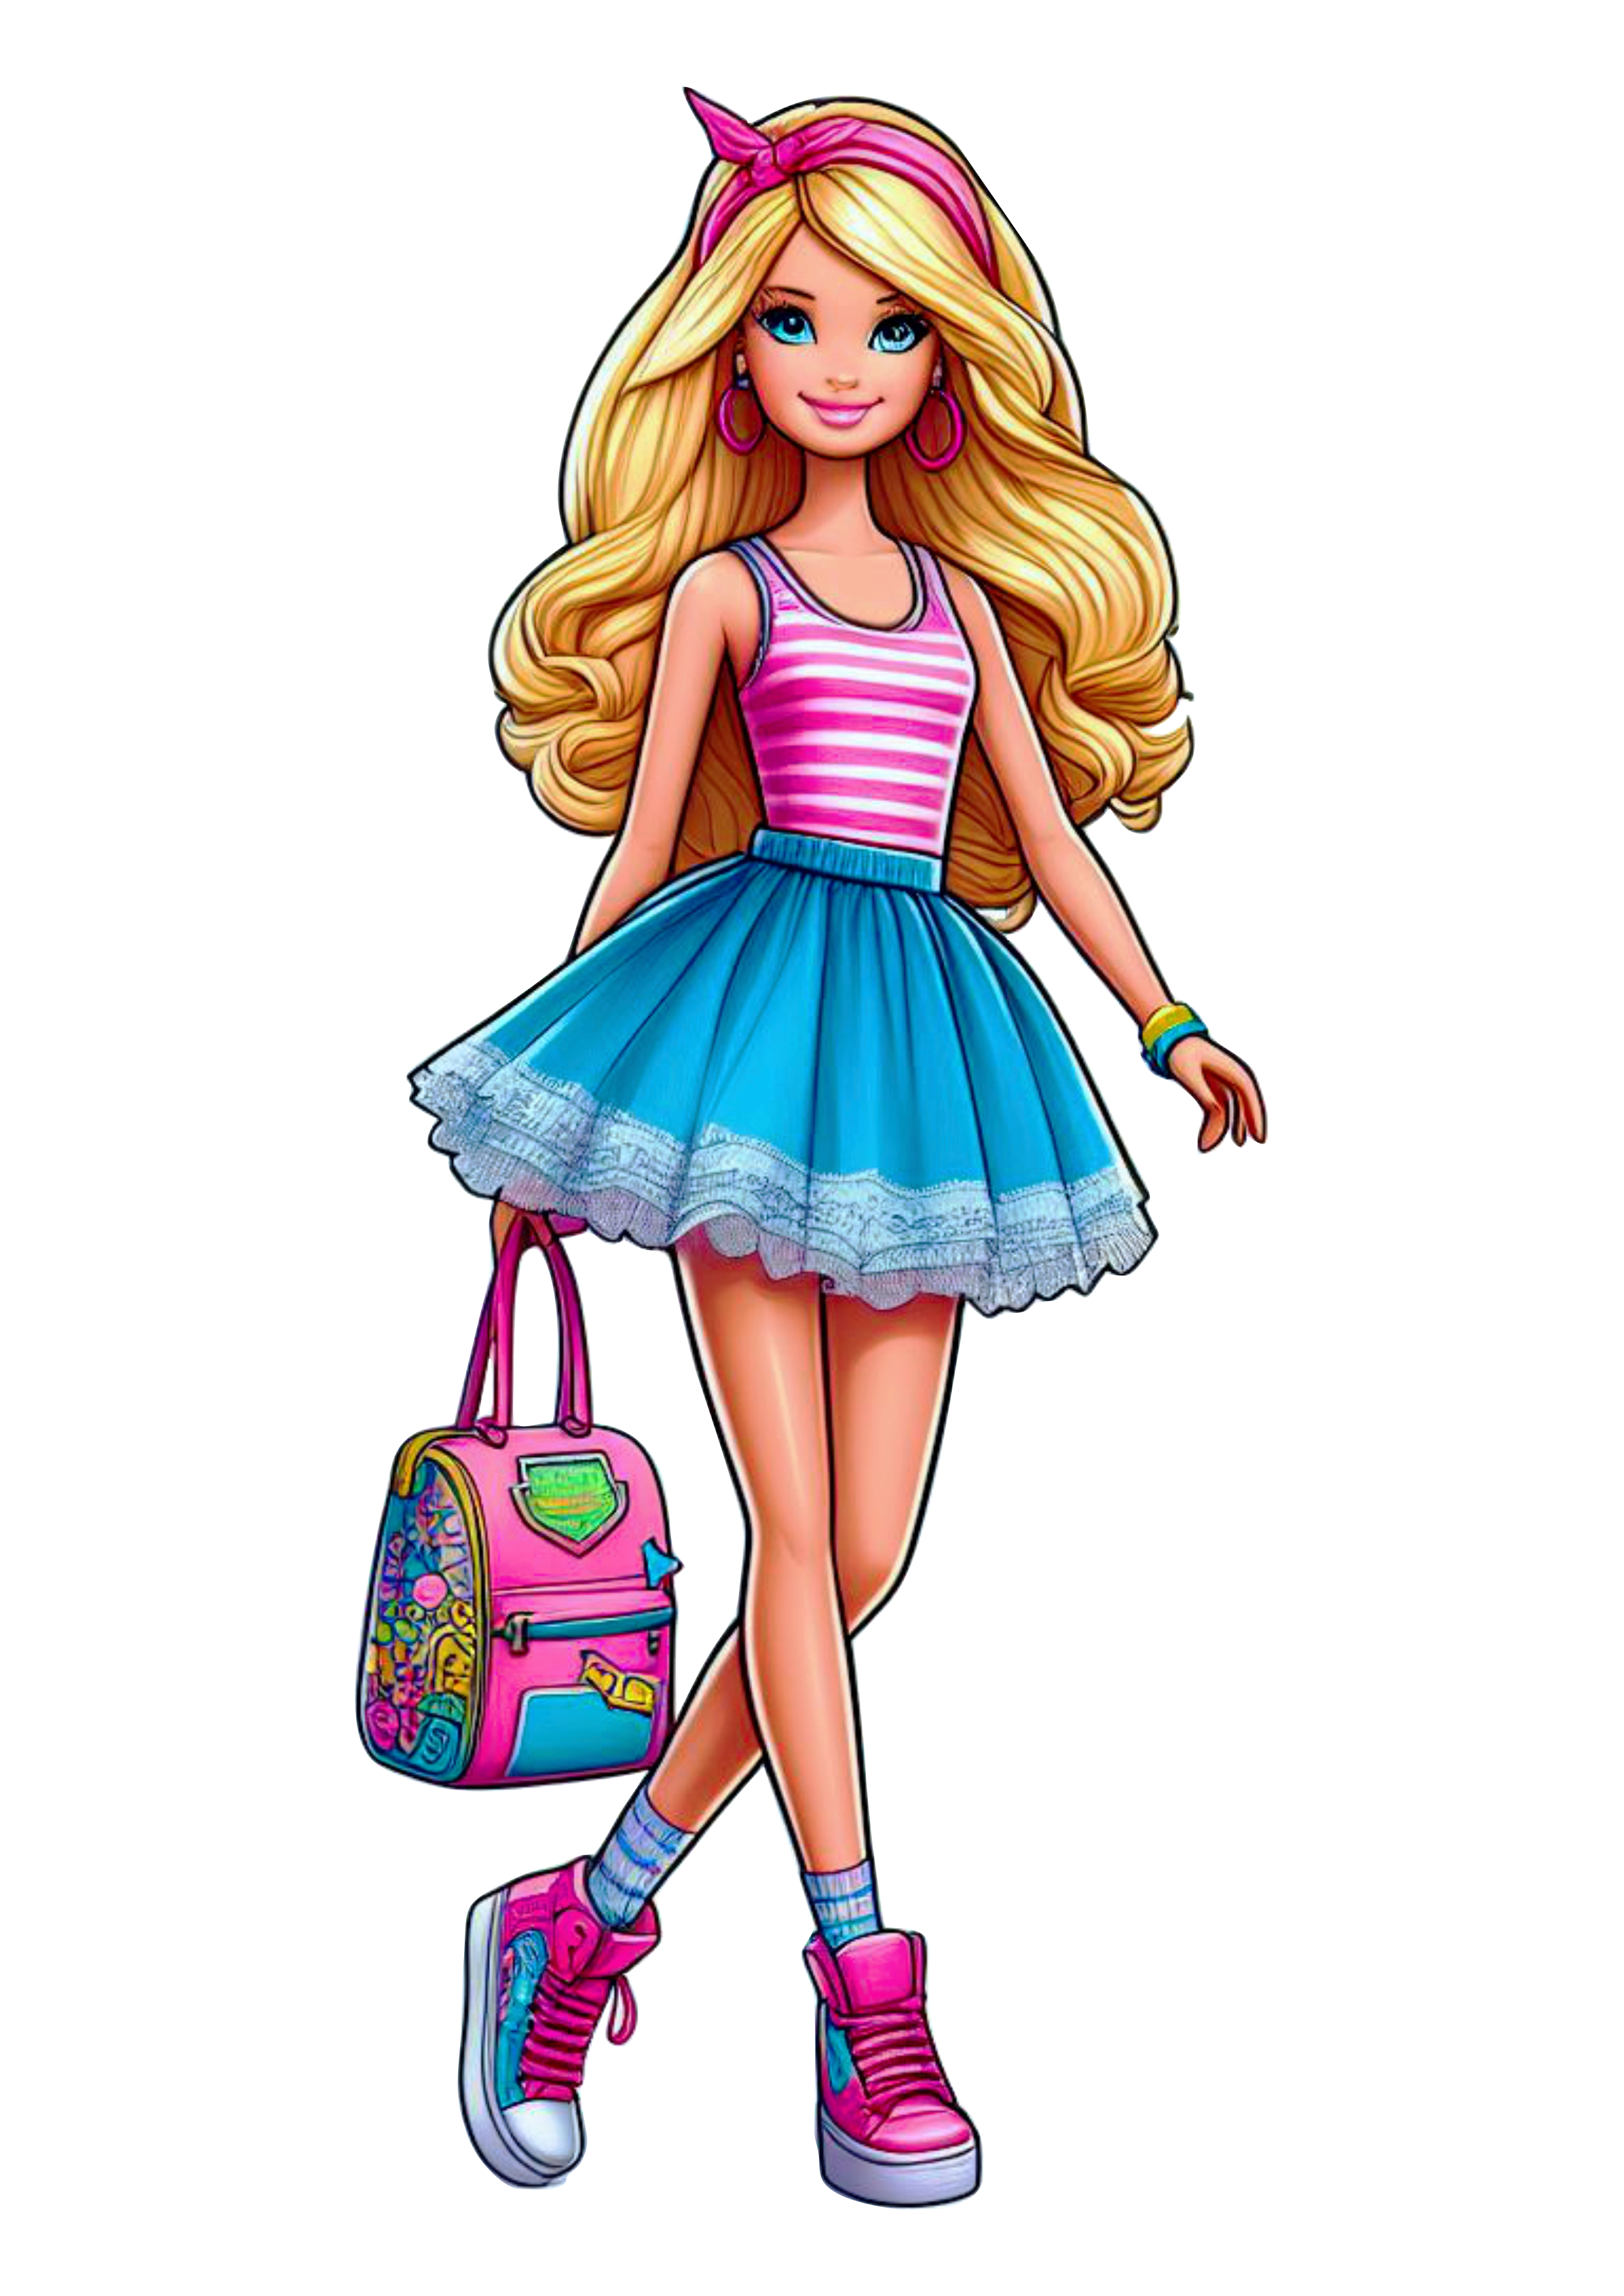 Barbie Student Doll Children’s Toy png images